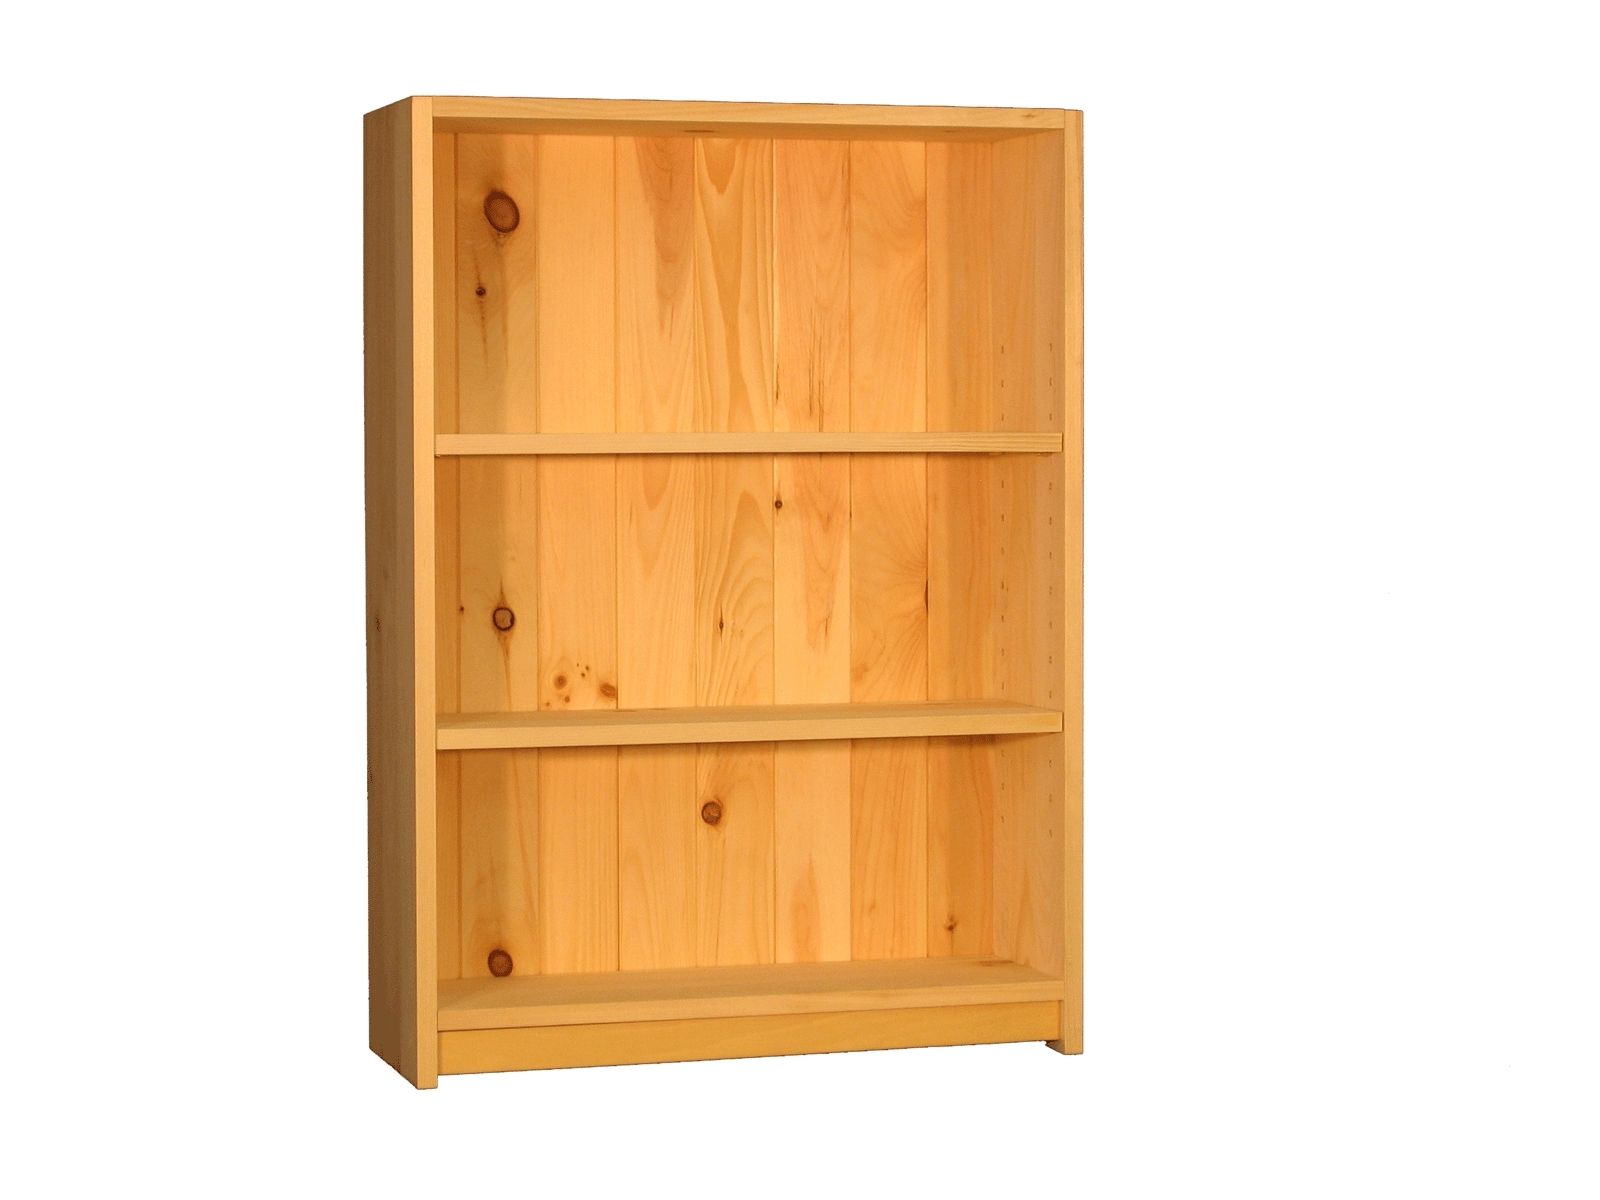 Popular Furniture Home: Bookshelves Bookcases Ikea Furniture Home Intended For 8 Inch Deep Bookcases (View 2 of 15)